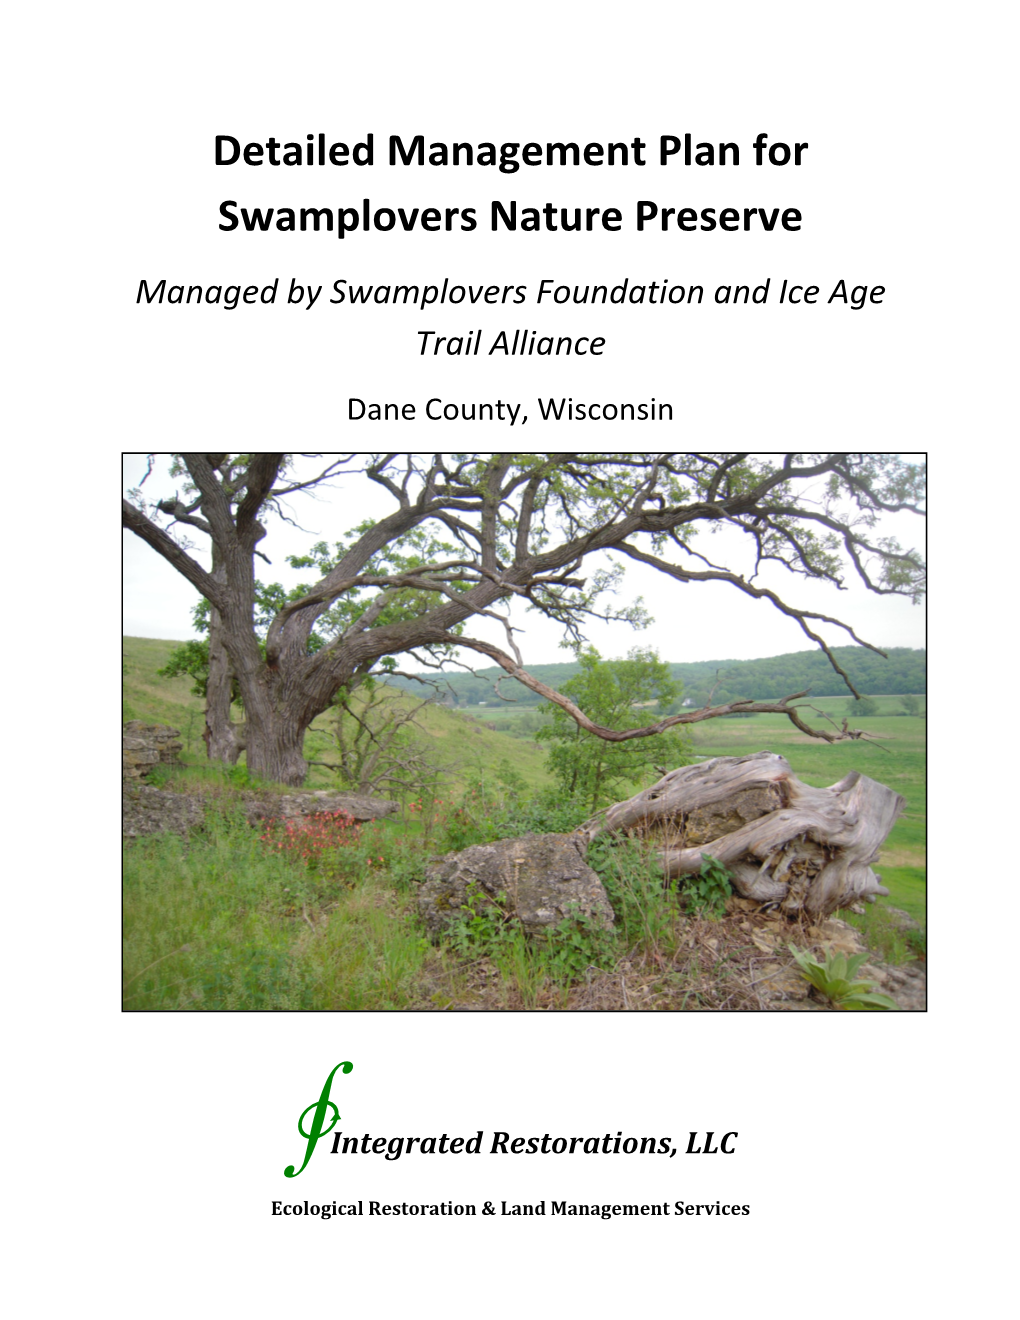 Detailed Management Plan for Swamplovers Nature Preserve Managed by Swamplovers Foundation and Ice Age Trail Alliance Dane County, Wisconsin